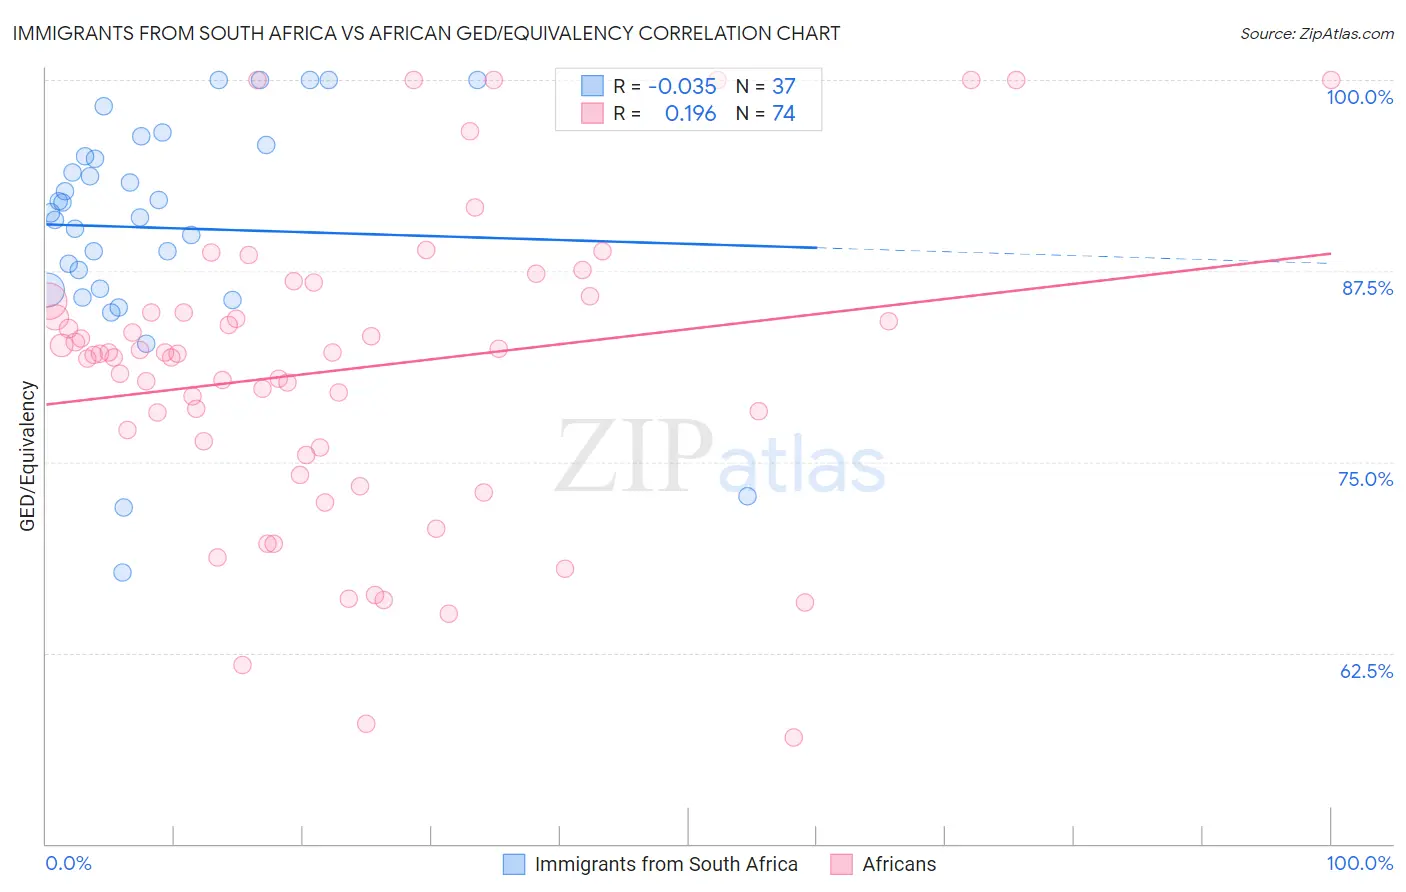 Immigrants from South Africa vs African GED/Equivalency